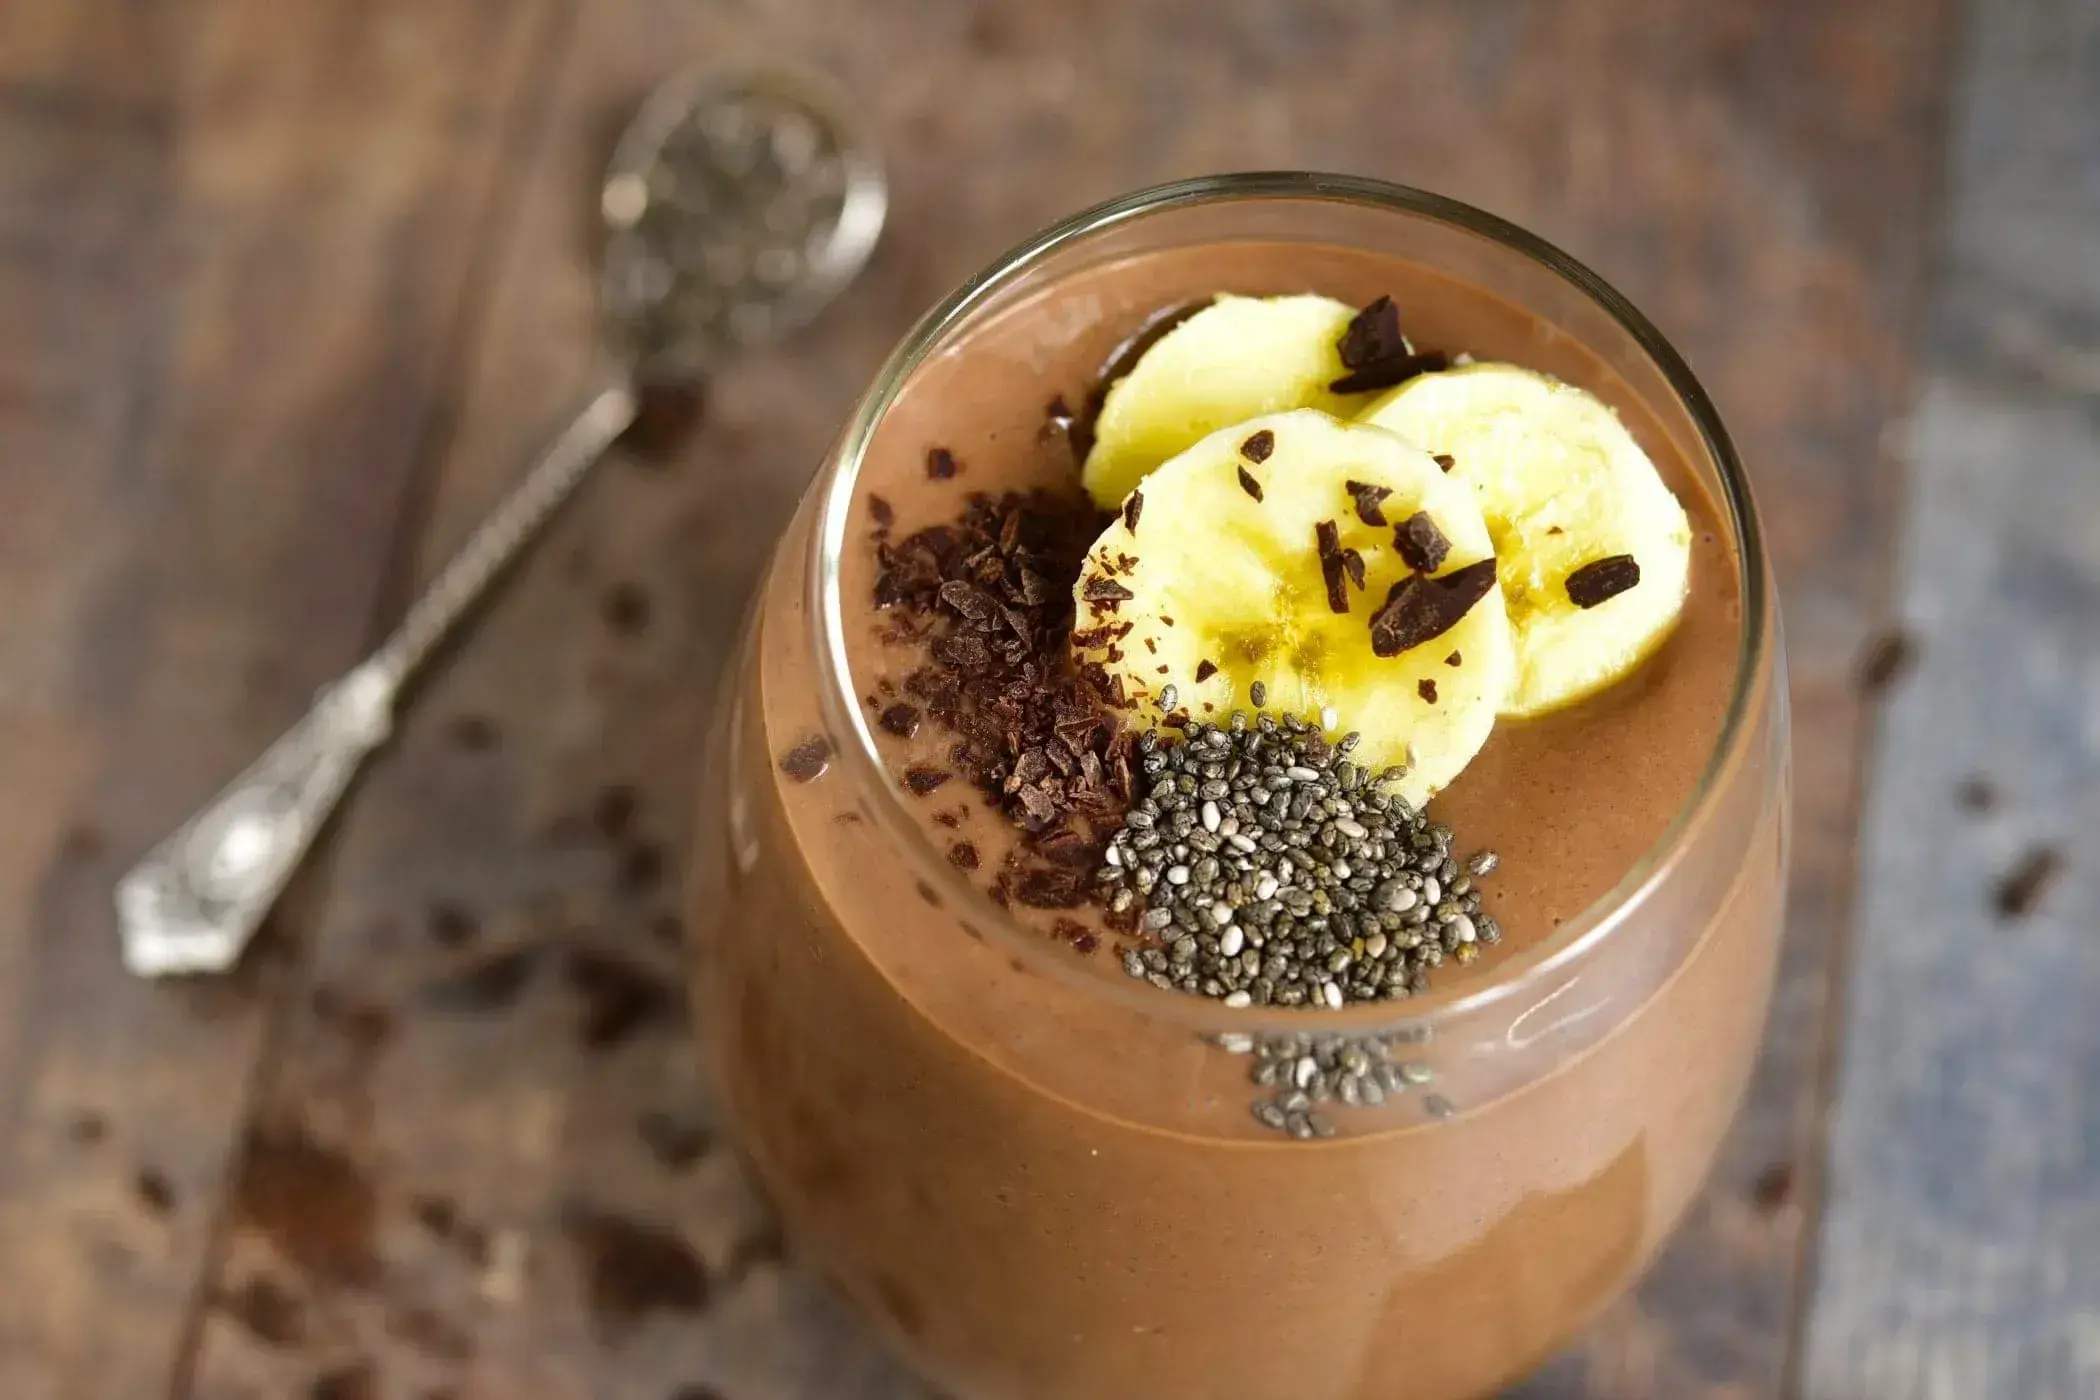 Chocolate cream with chia seedsimage